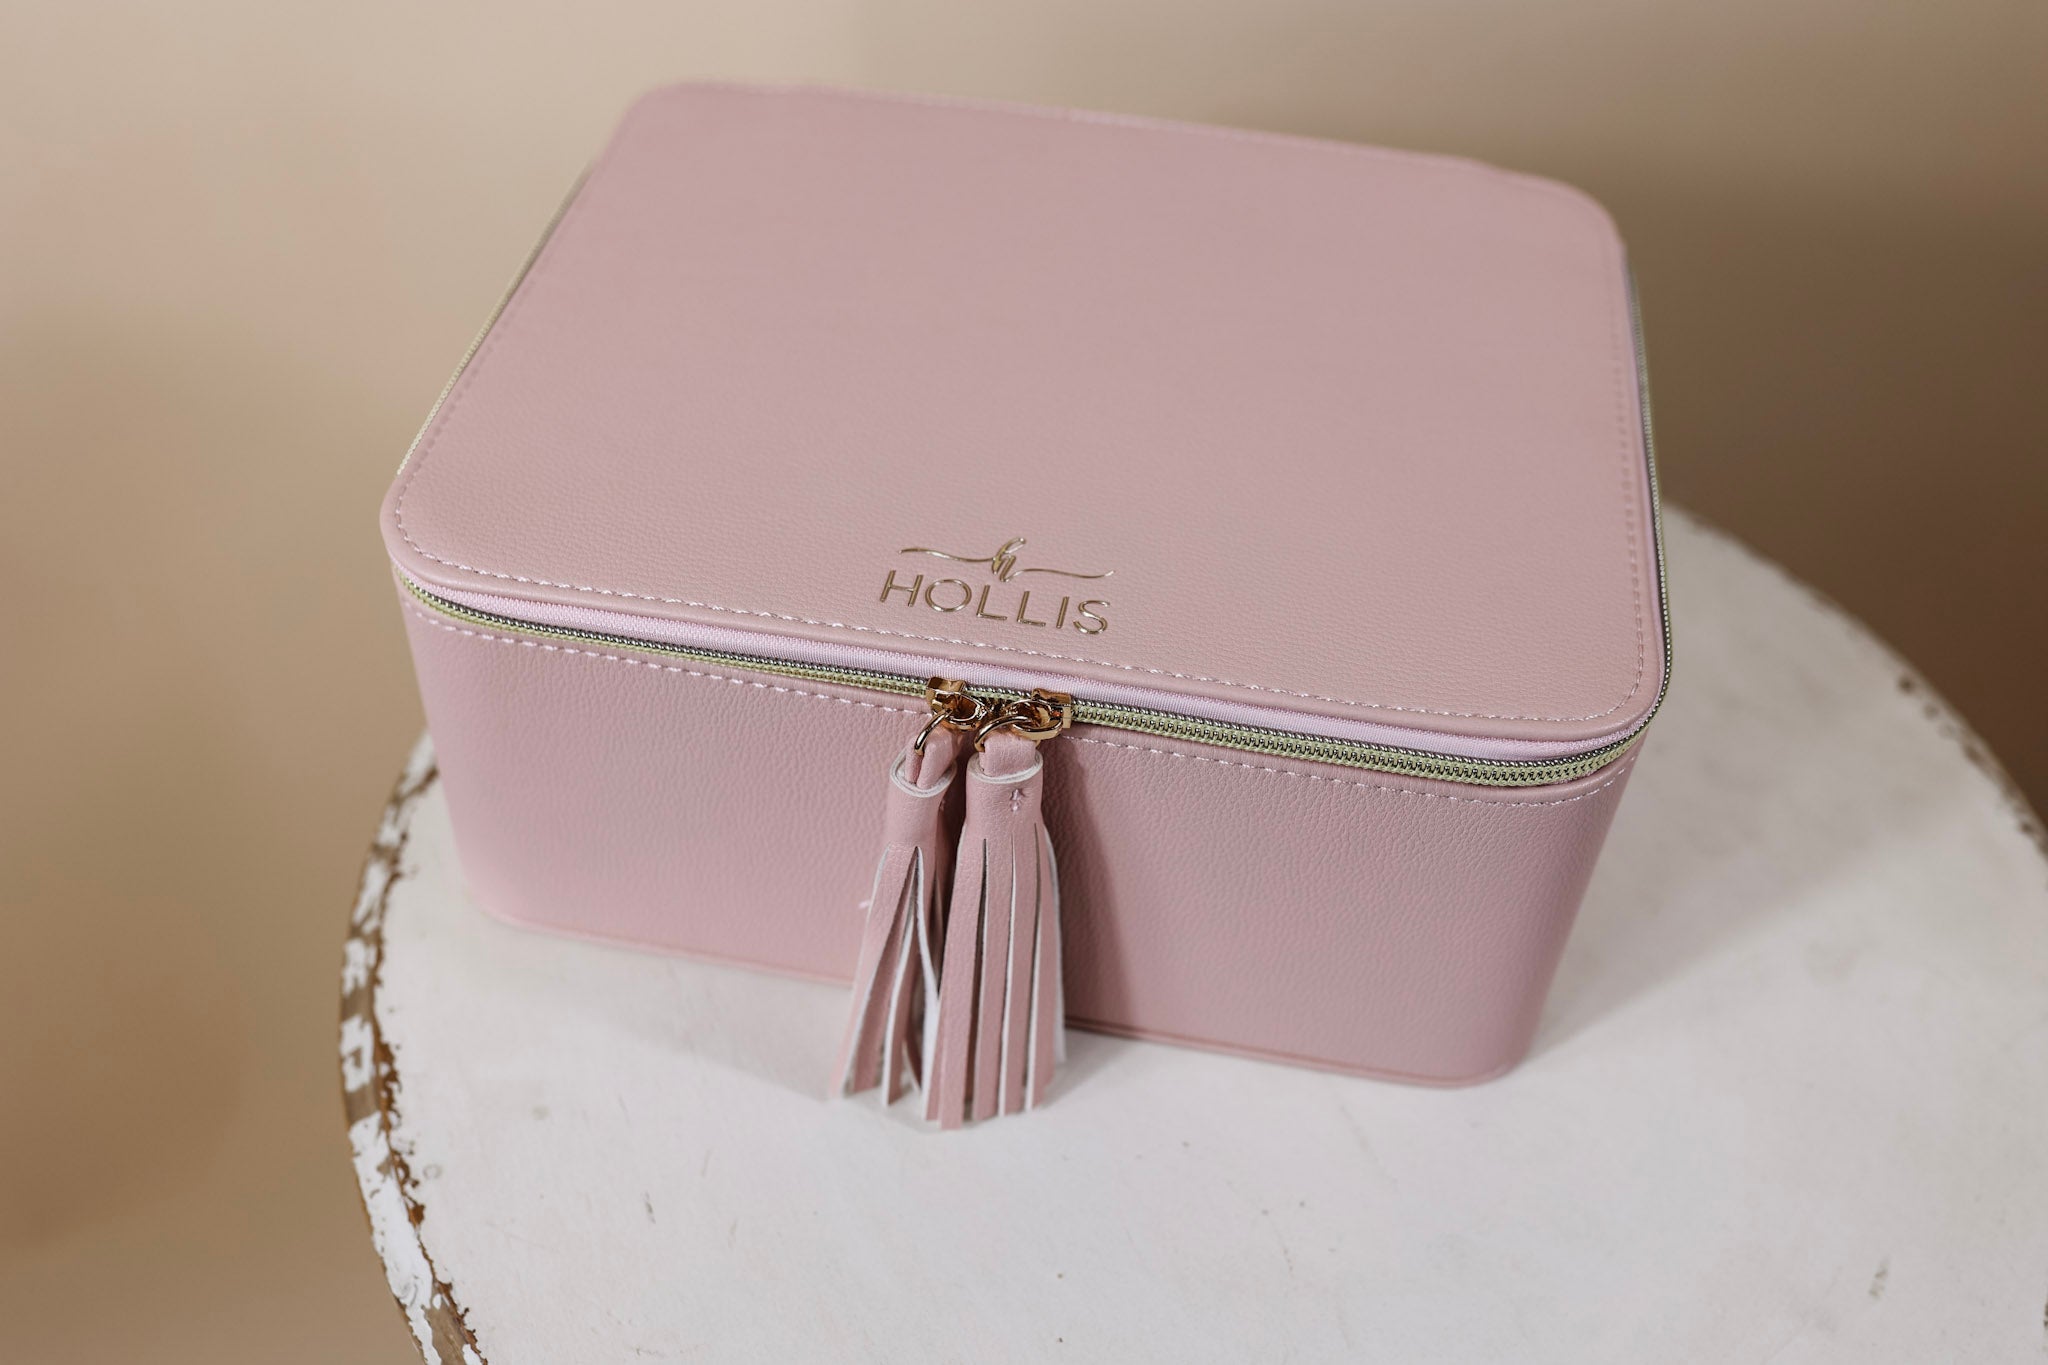 A blush pink bag is sitting in the middle of the picture. Background is solid tan. 